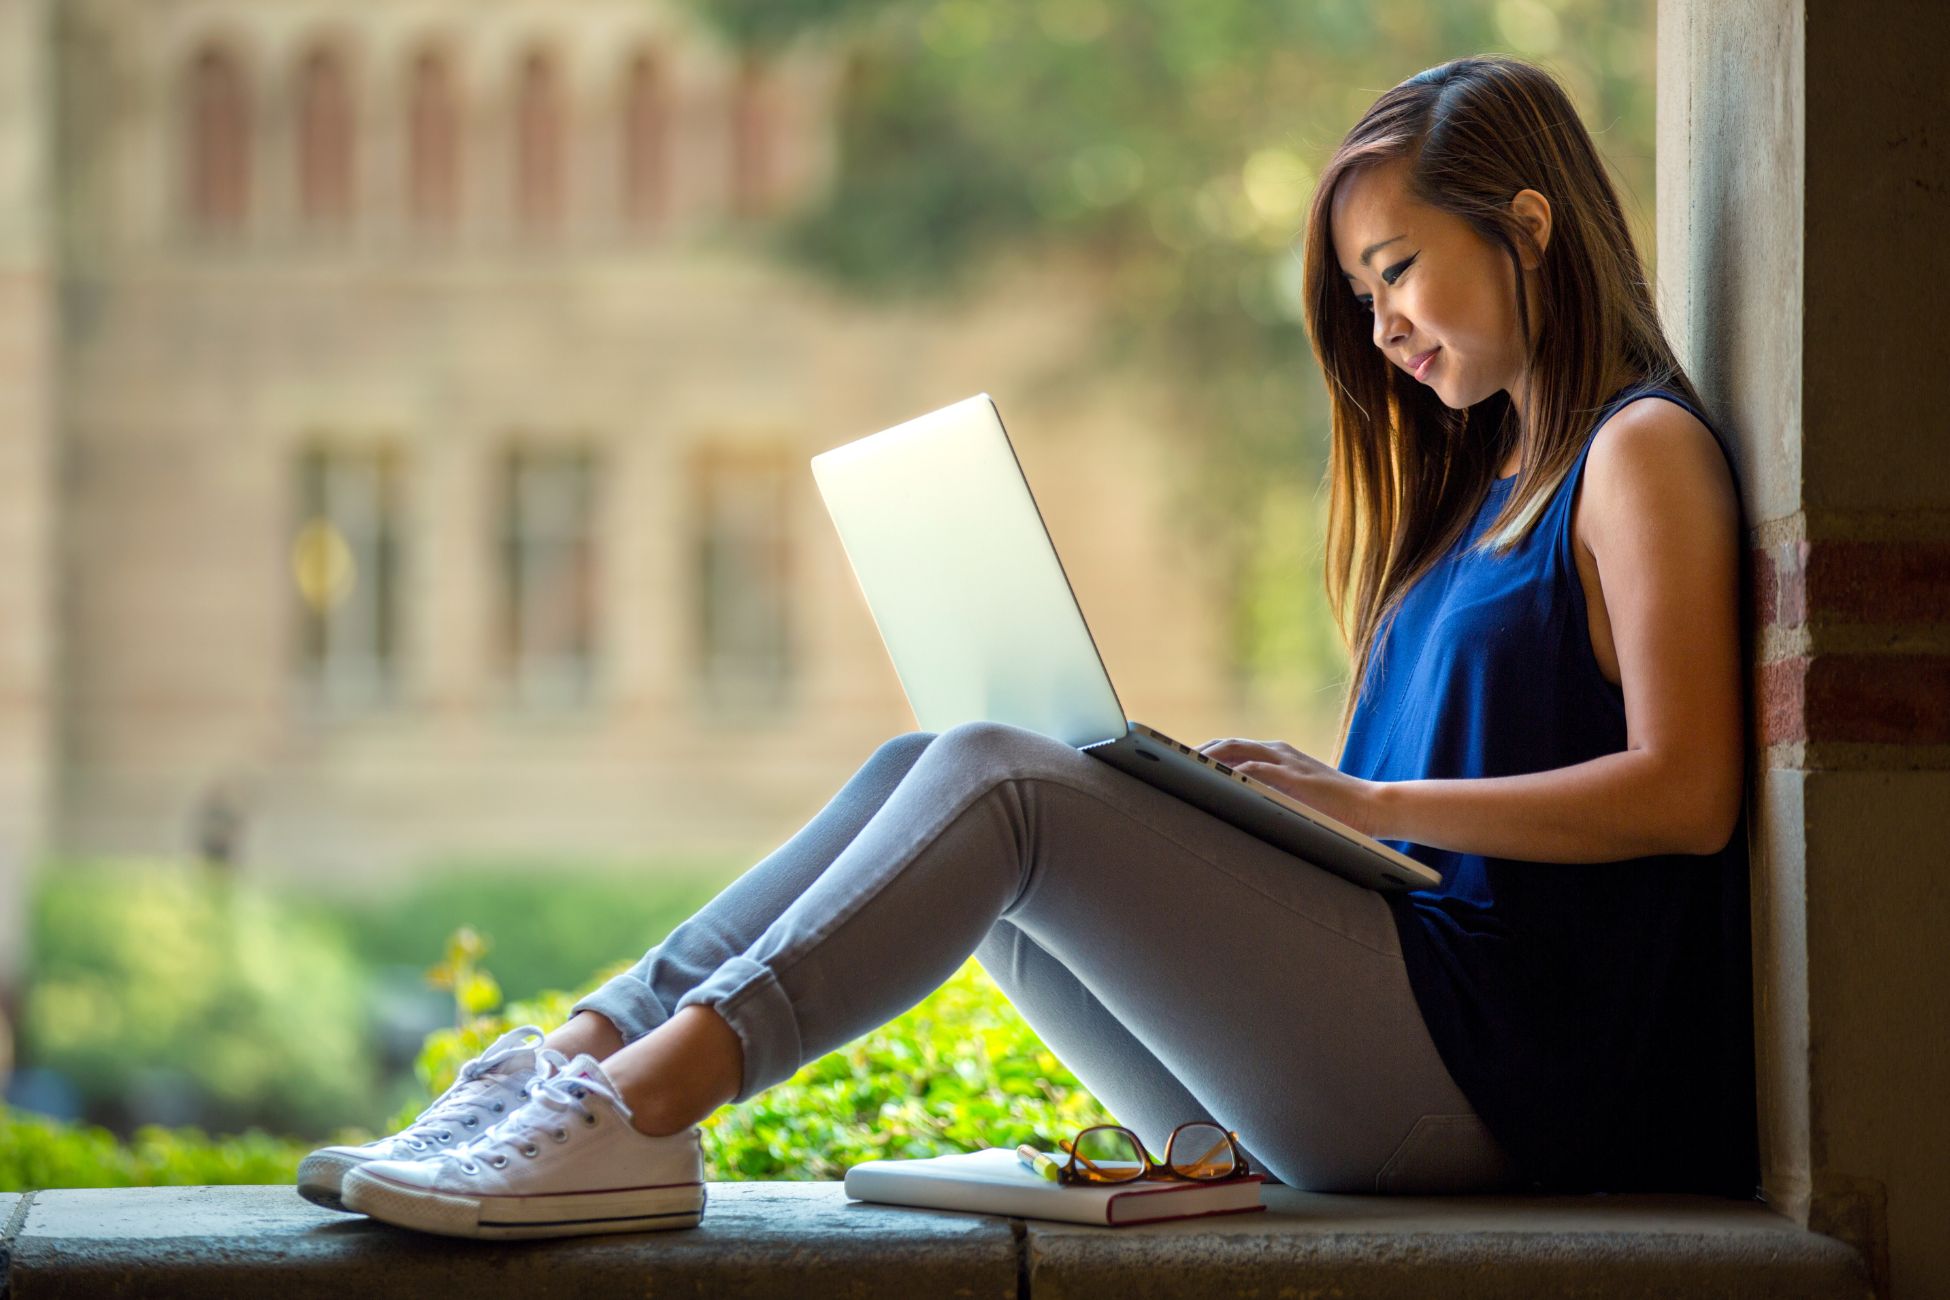 Young woman types on laptop and sits in arched wall opening with brick building in background